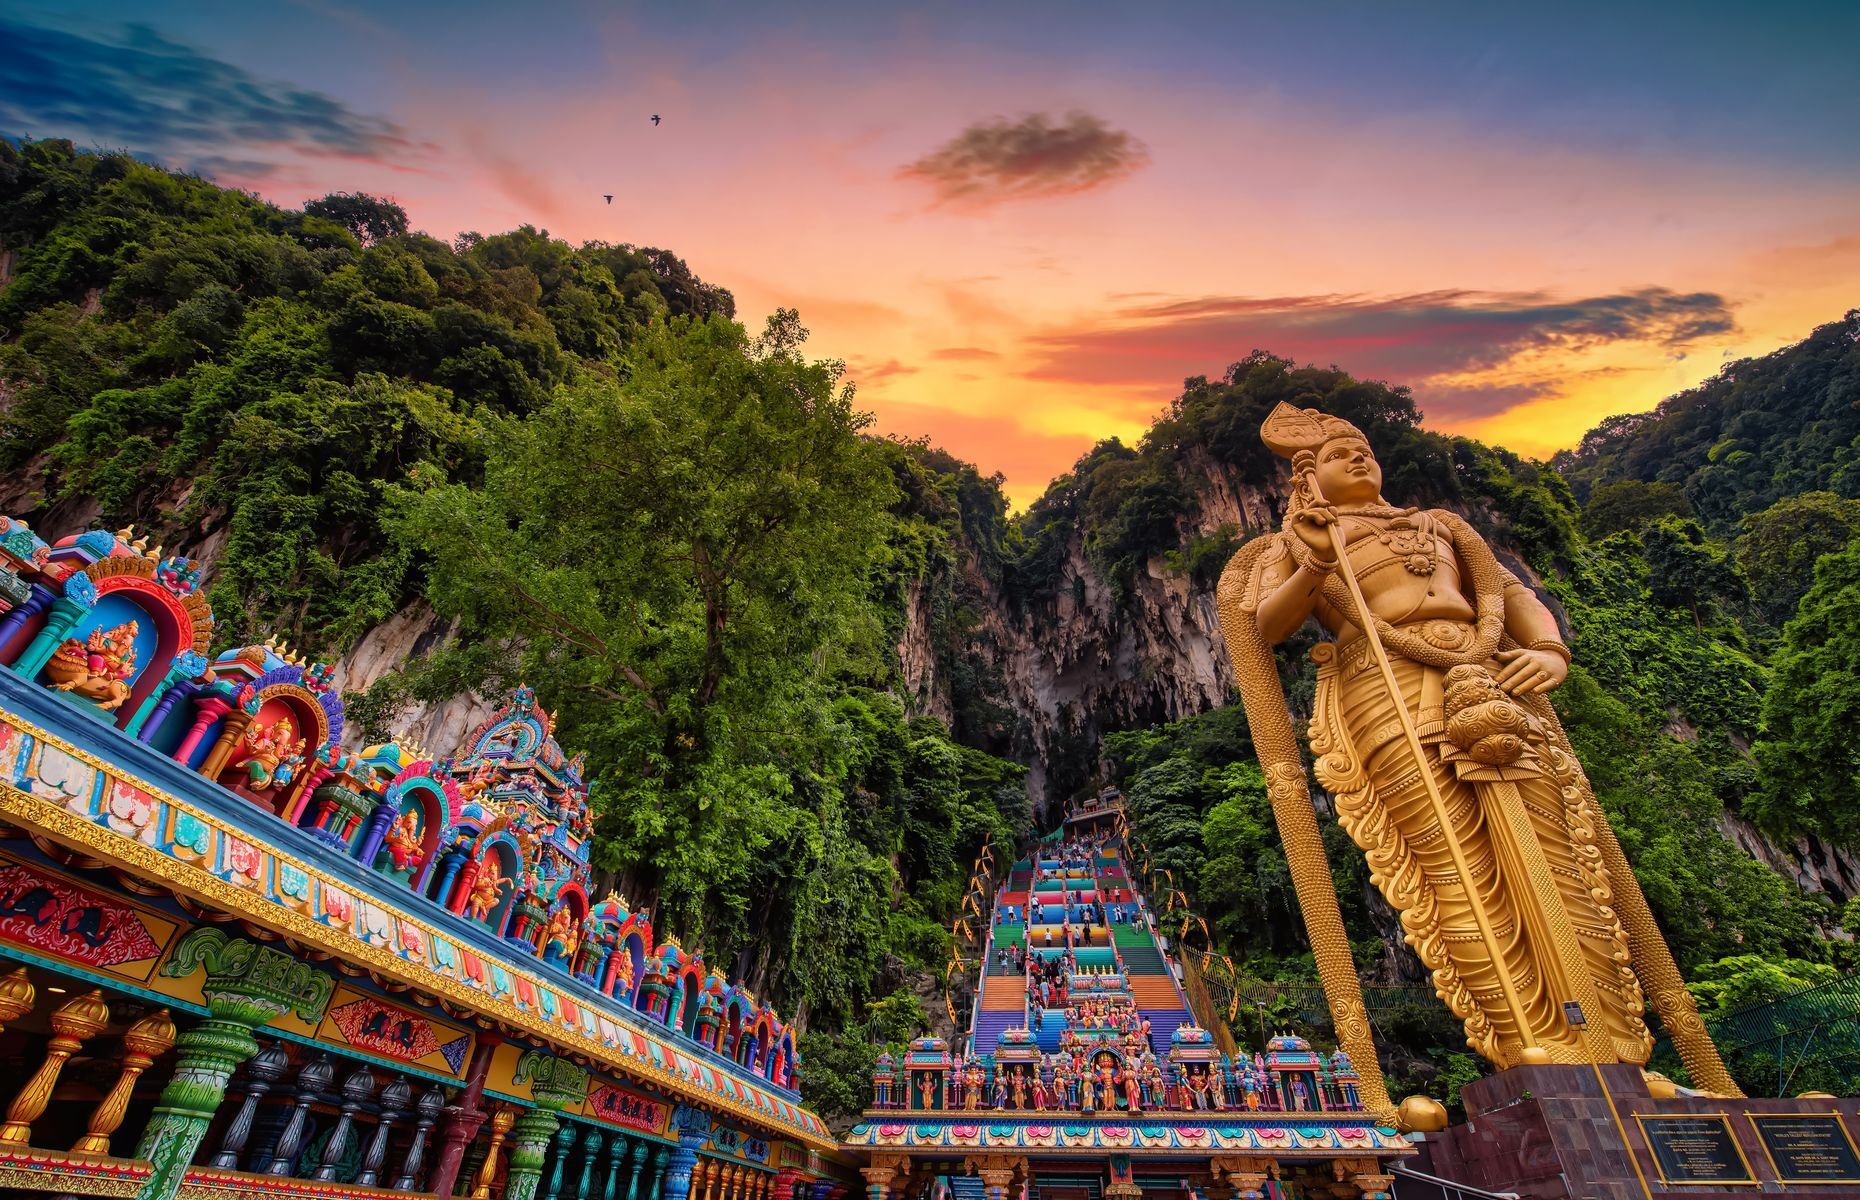 You’ll find <a href="https://www.getyourguide.com/grottes-de-batu-l4011/" rel="noreferrer noopener">the Batu Caves</a> about 15 minutes by car from Kuala Lumpur. These geological and cultural wonders captivate visitors from all over the world. After climbing 272 steps, visit a series of fascinating caverns adorned with gigantic statues of Hindu deities. Considered sanctuaries, the Batu Caves are open to visitors year-round, but the best moment to see them is in January or February during the Thaipusam celebrations when festive decorations bring the caves to life.